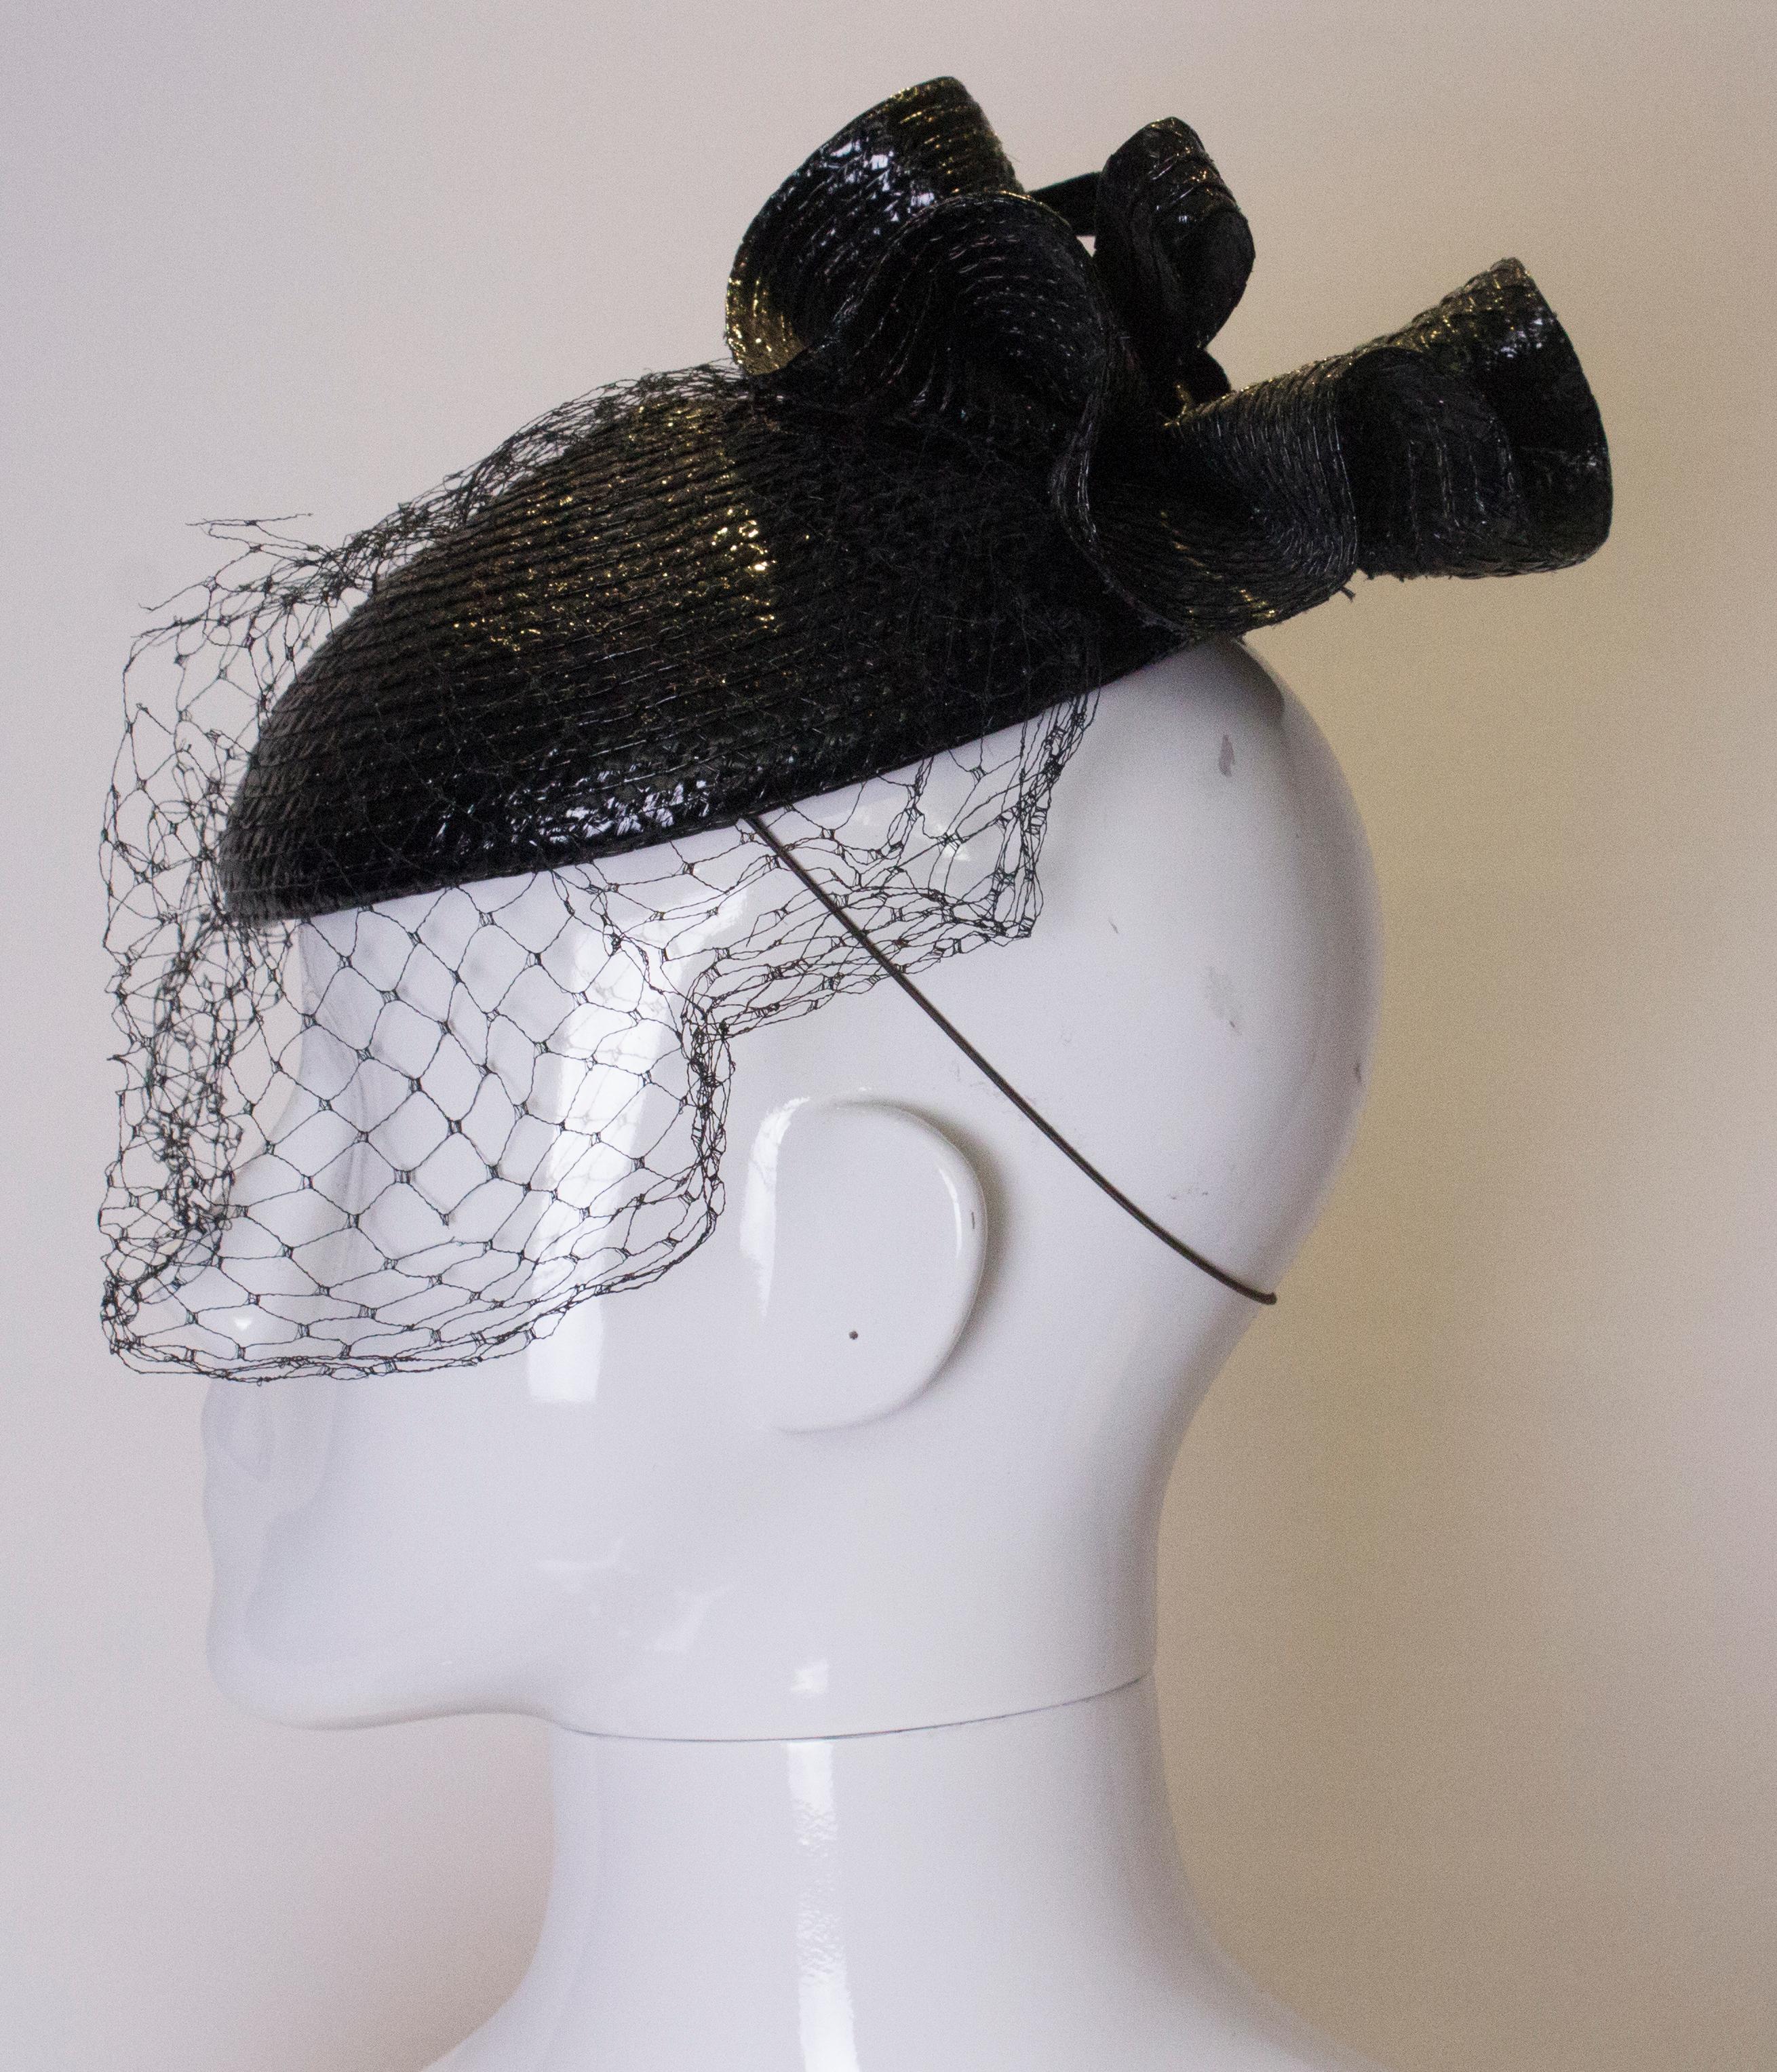 A chic vintage hat by Graham Smith for Kangol, sold at Harrods. It has a decorative straw bow and net veil . The inner circumference is 18''.